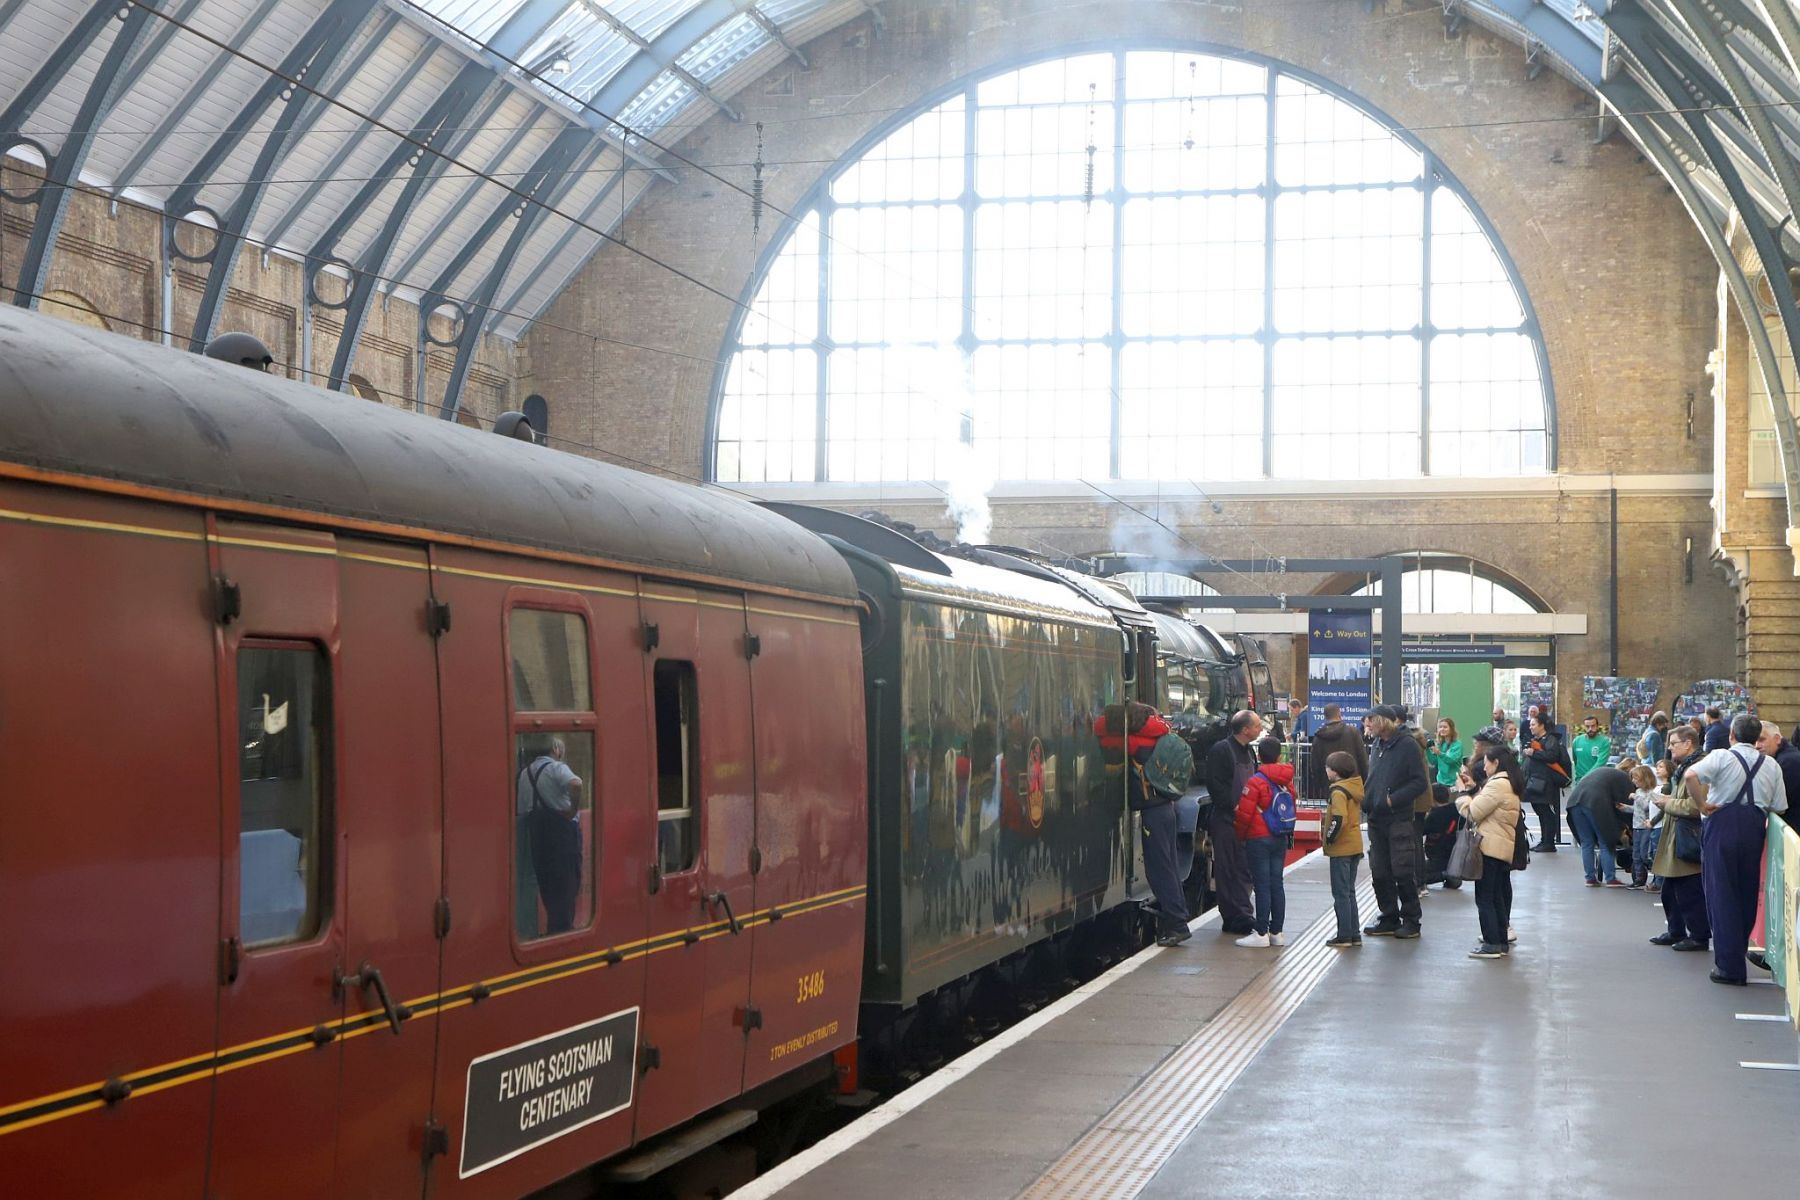 Flying Scotsman and support coach under the arched roof of the King's Cross train shed. Flying Scotsman steam locomotive at King's Cross railway station platform 8 for the 170th anniversary of the station's opening and the start of Flying Scotsman's 100th birthday celebrations